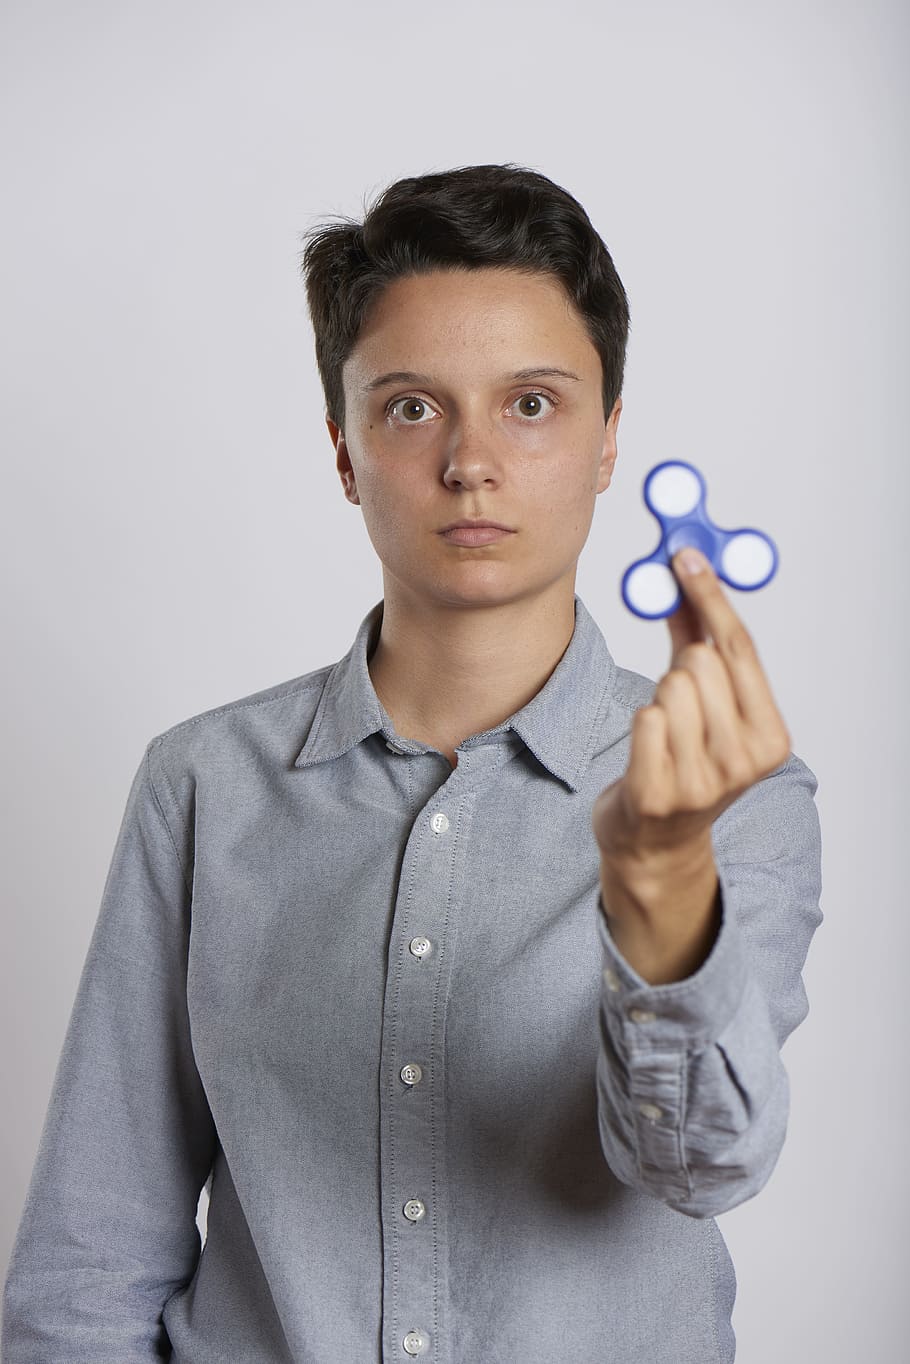 fidget spinner, woman, holding, play, toy, fad, game, gadget, HD wallpaper